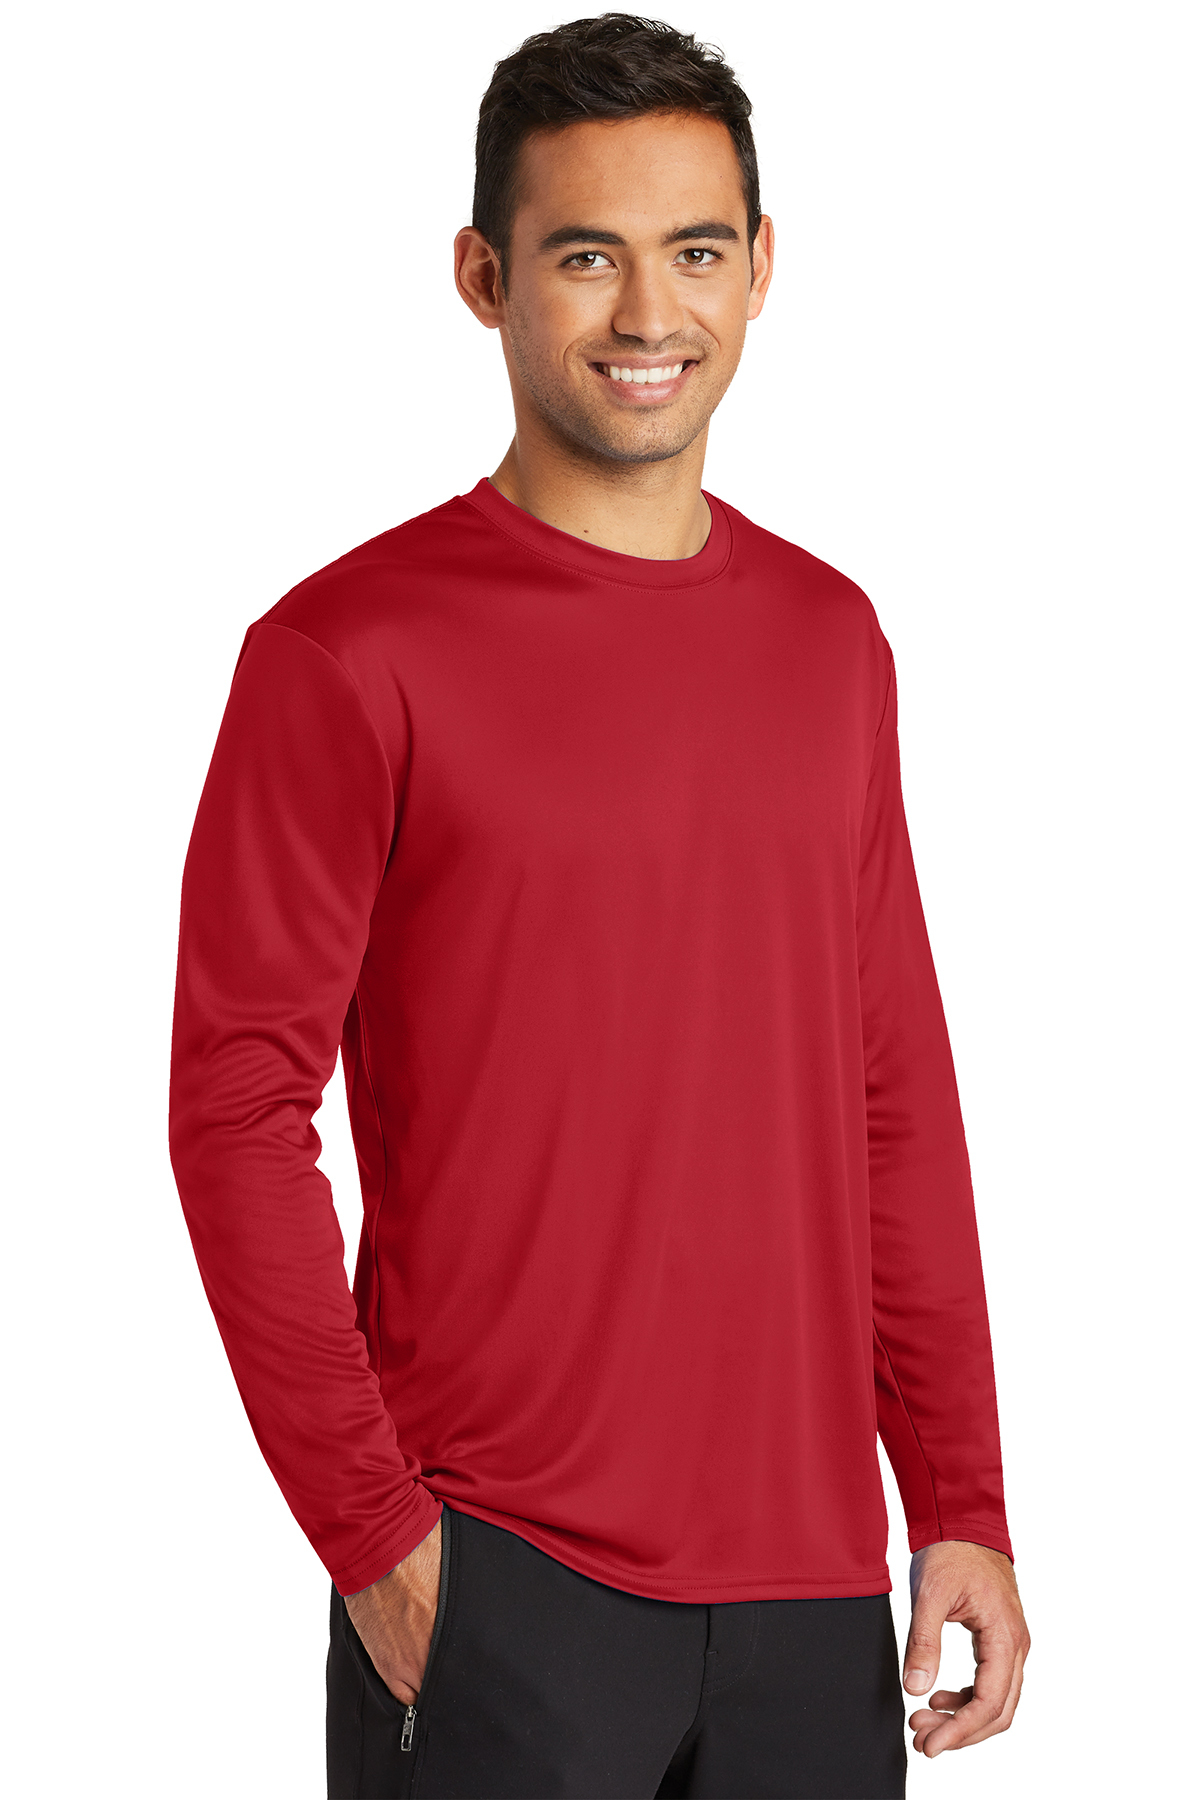 Port & Company ® Long Sleeve Performance Tee | Product | Online Apparel ...